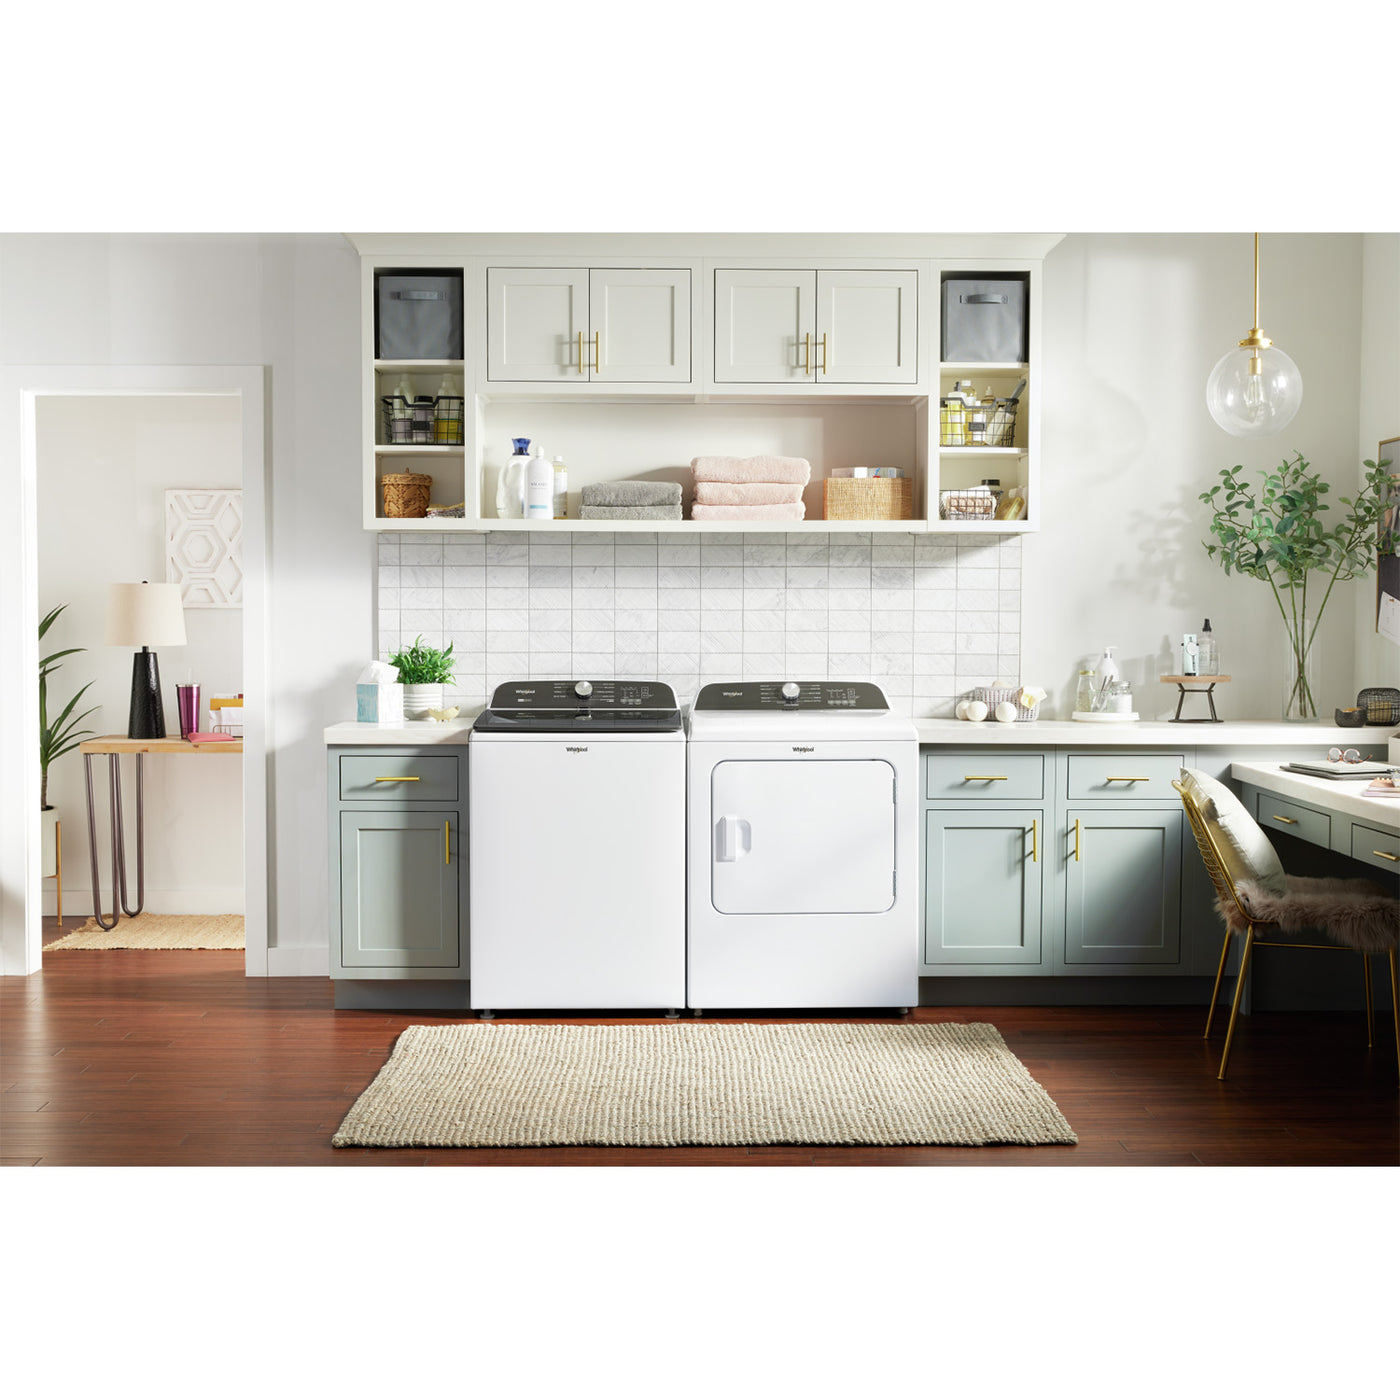 Whirlpool White Electric Dryer (7.0 Cu Ft) - YWED6150PW